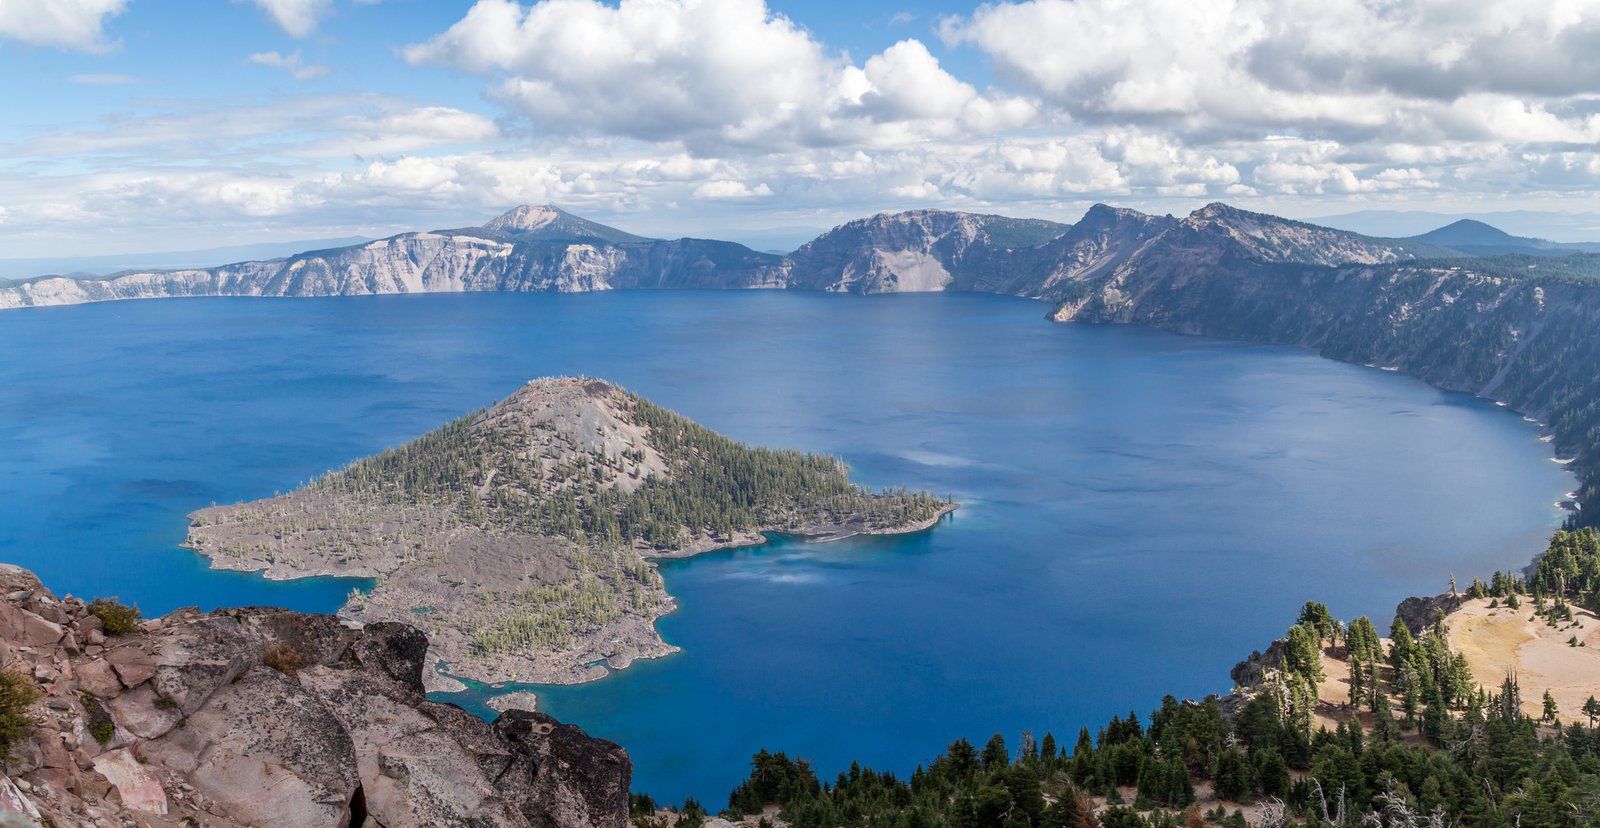 The deep blue Crater Lake and Wizard Island as seen from Watchman Peak Trail on the western rim opposite Mt. Scott in the Southern Oregon Cascades on a late summer day with clouds.